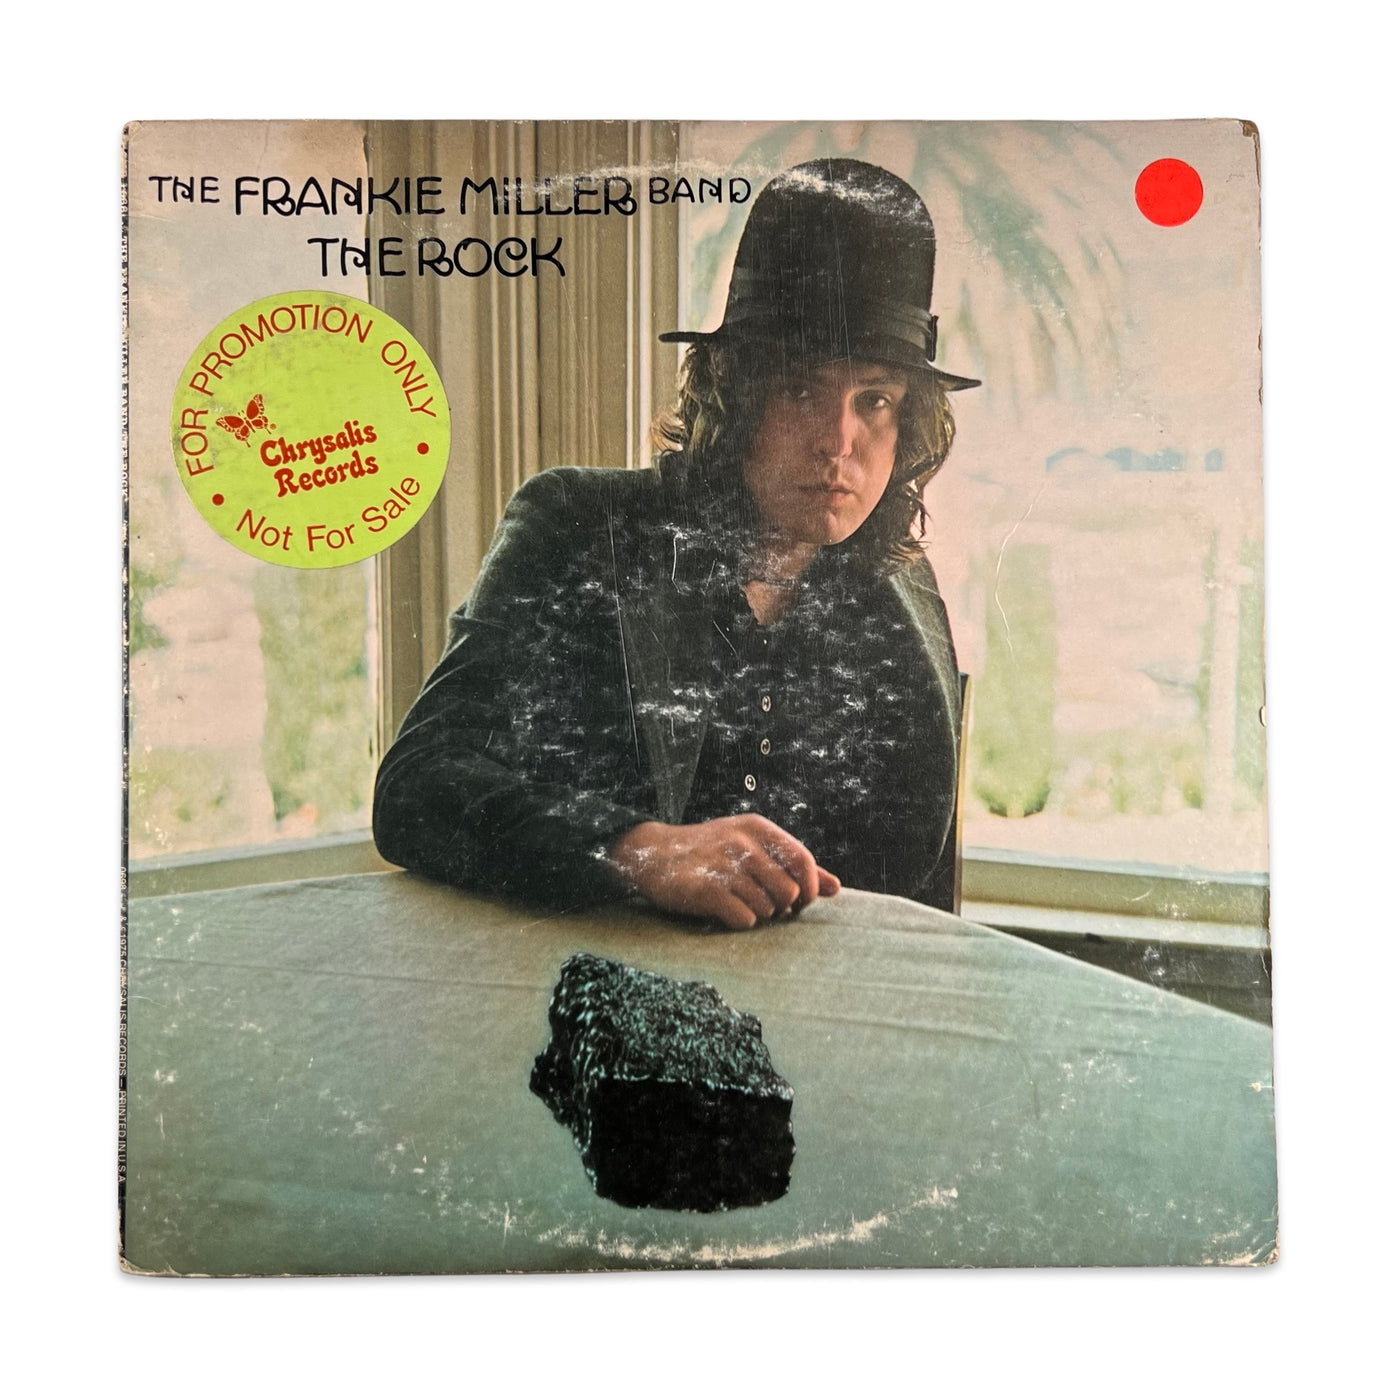 The Frankie Miller Band – The Rock